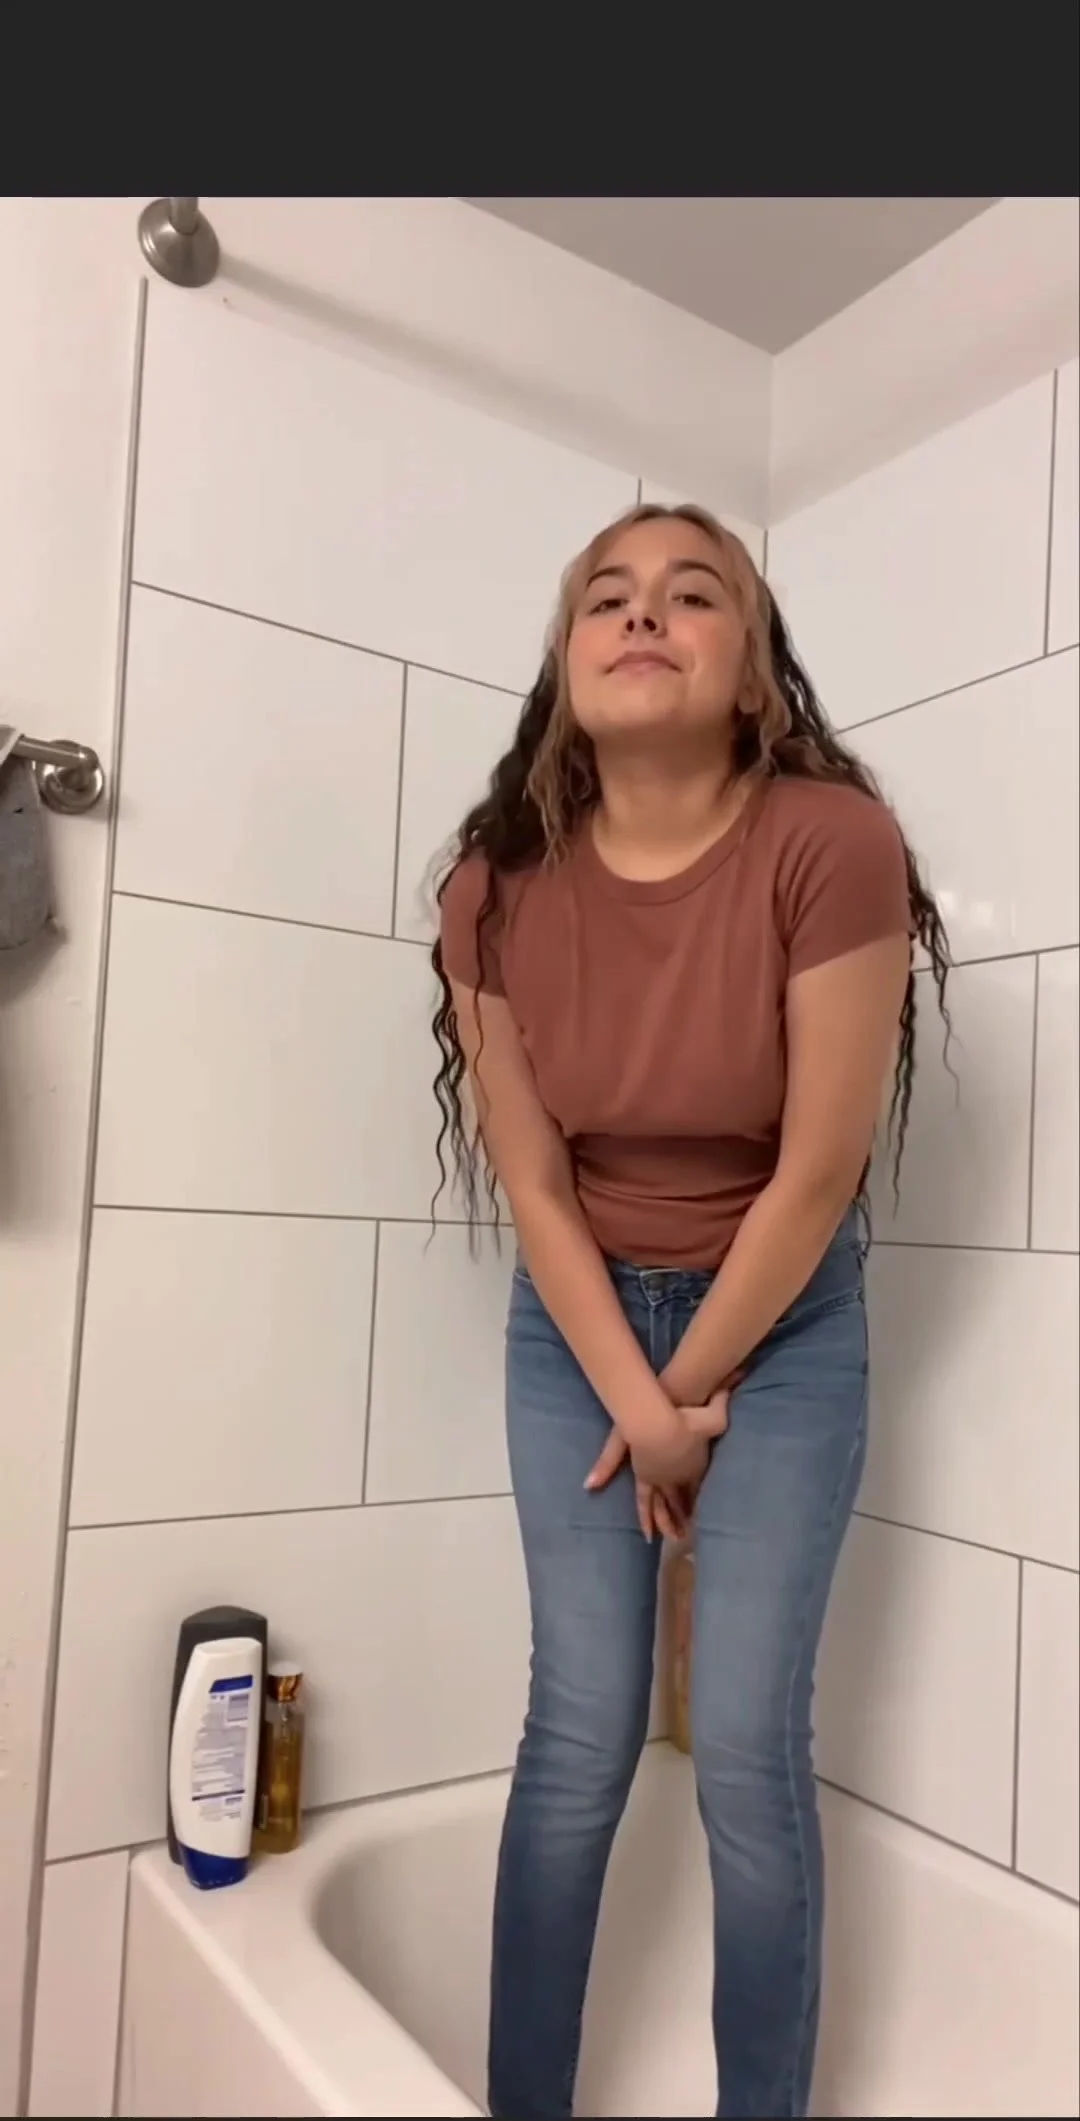 Latin Teen Pissing - Cute Latina Peeing Her Jeans - ThisVid.com